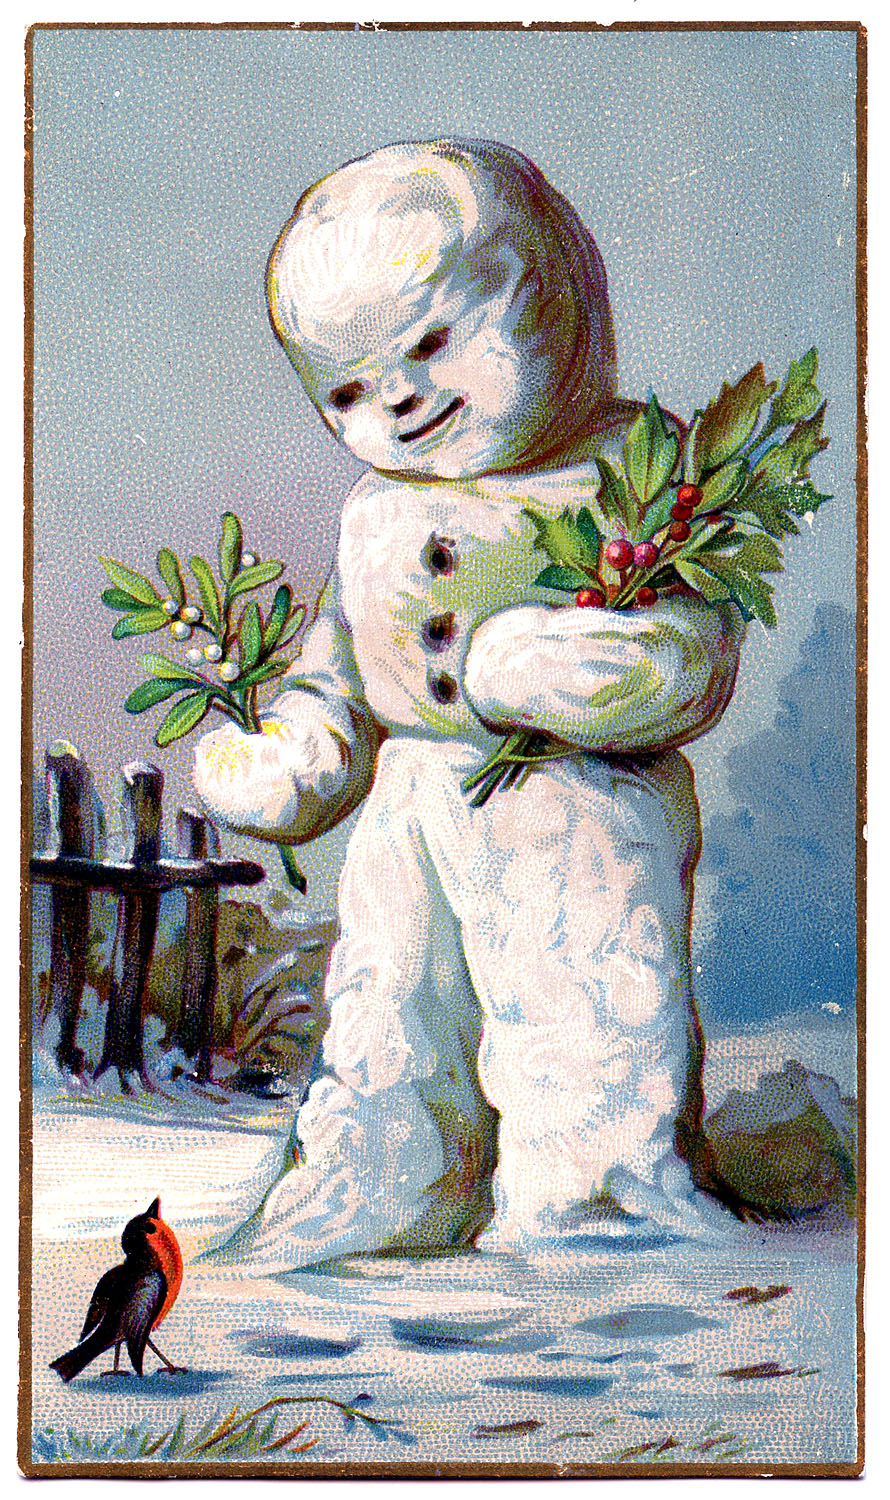 Vintage Christmas Graphic - Snowman with Holly - The Graphics Fairy